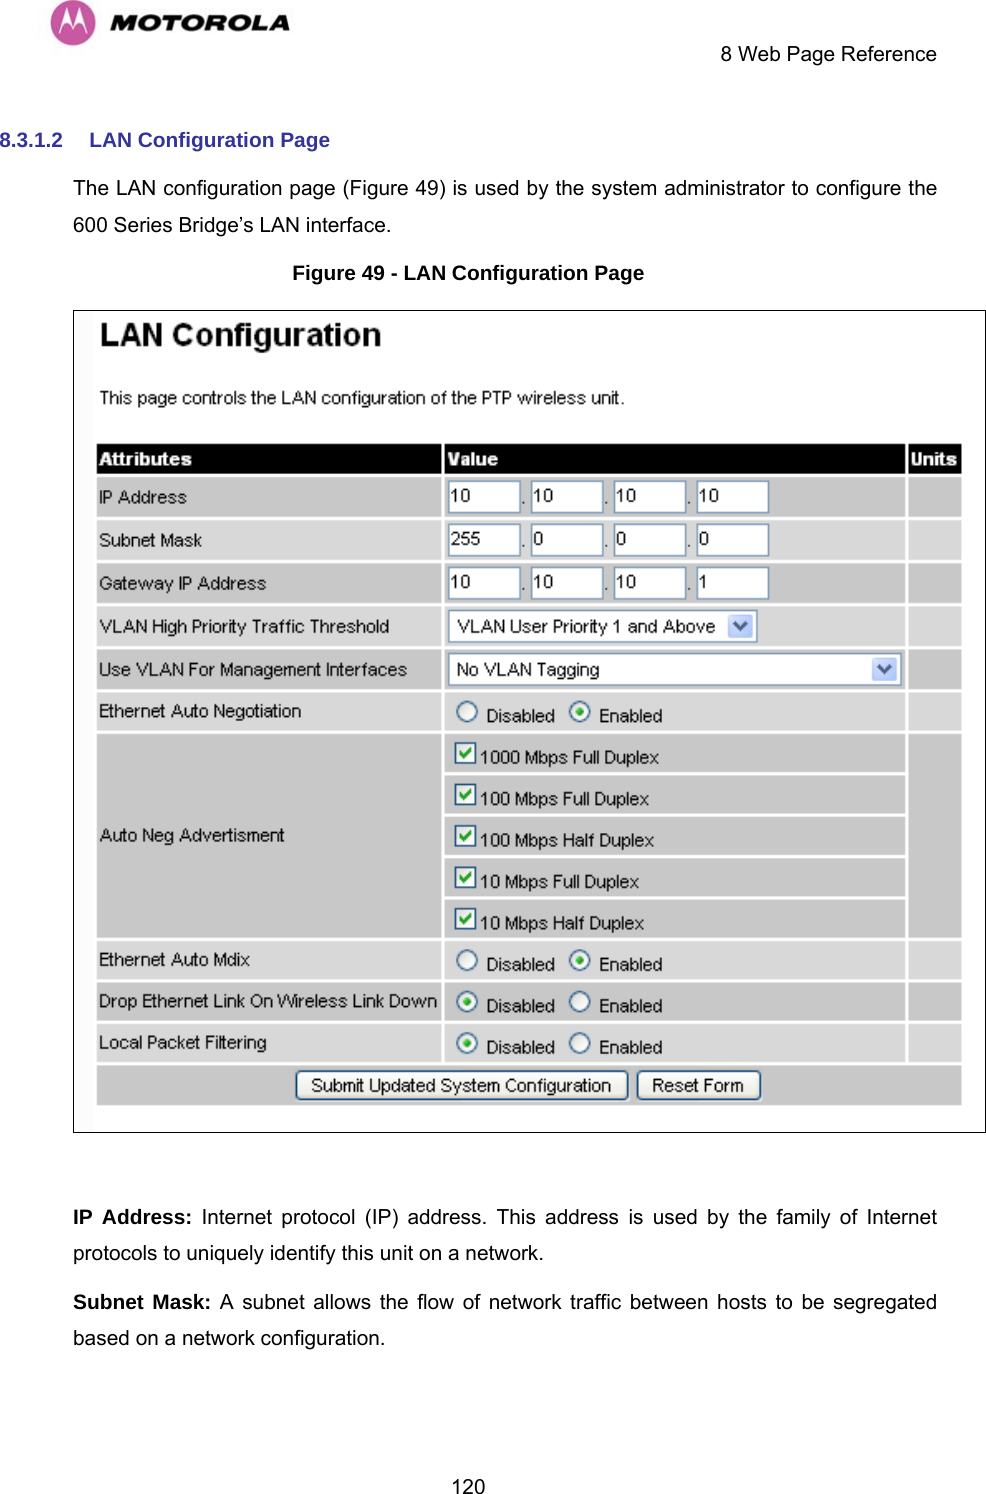     8 Web Page Reference  1208.3.1.2  LAN Configuration Page The LAN configuration page (Figure 49) is used by the system administrator to configure the 600 Series Bridge’s LAN interface. Figure 49 - LAN Configuration Page   IP Address: Internet protocol (IP) address. This address is used by the family of Internet protocols to uniquely identify this unit on a network.  Subnet Mask: A subnet allows the flow of network traffic between hosts to be segregated based on a network configuration.  